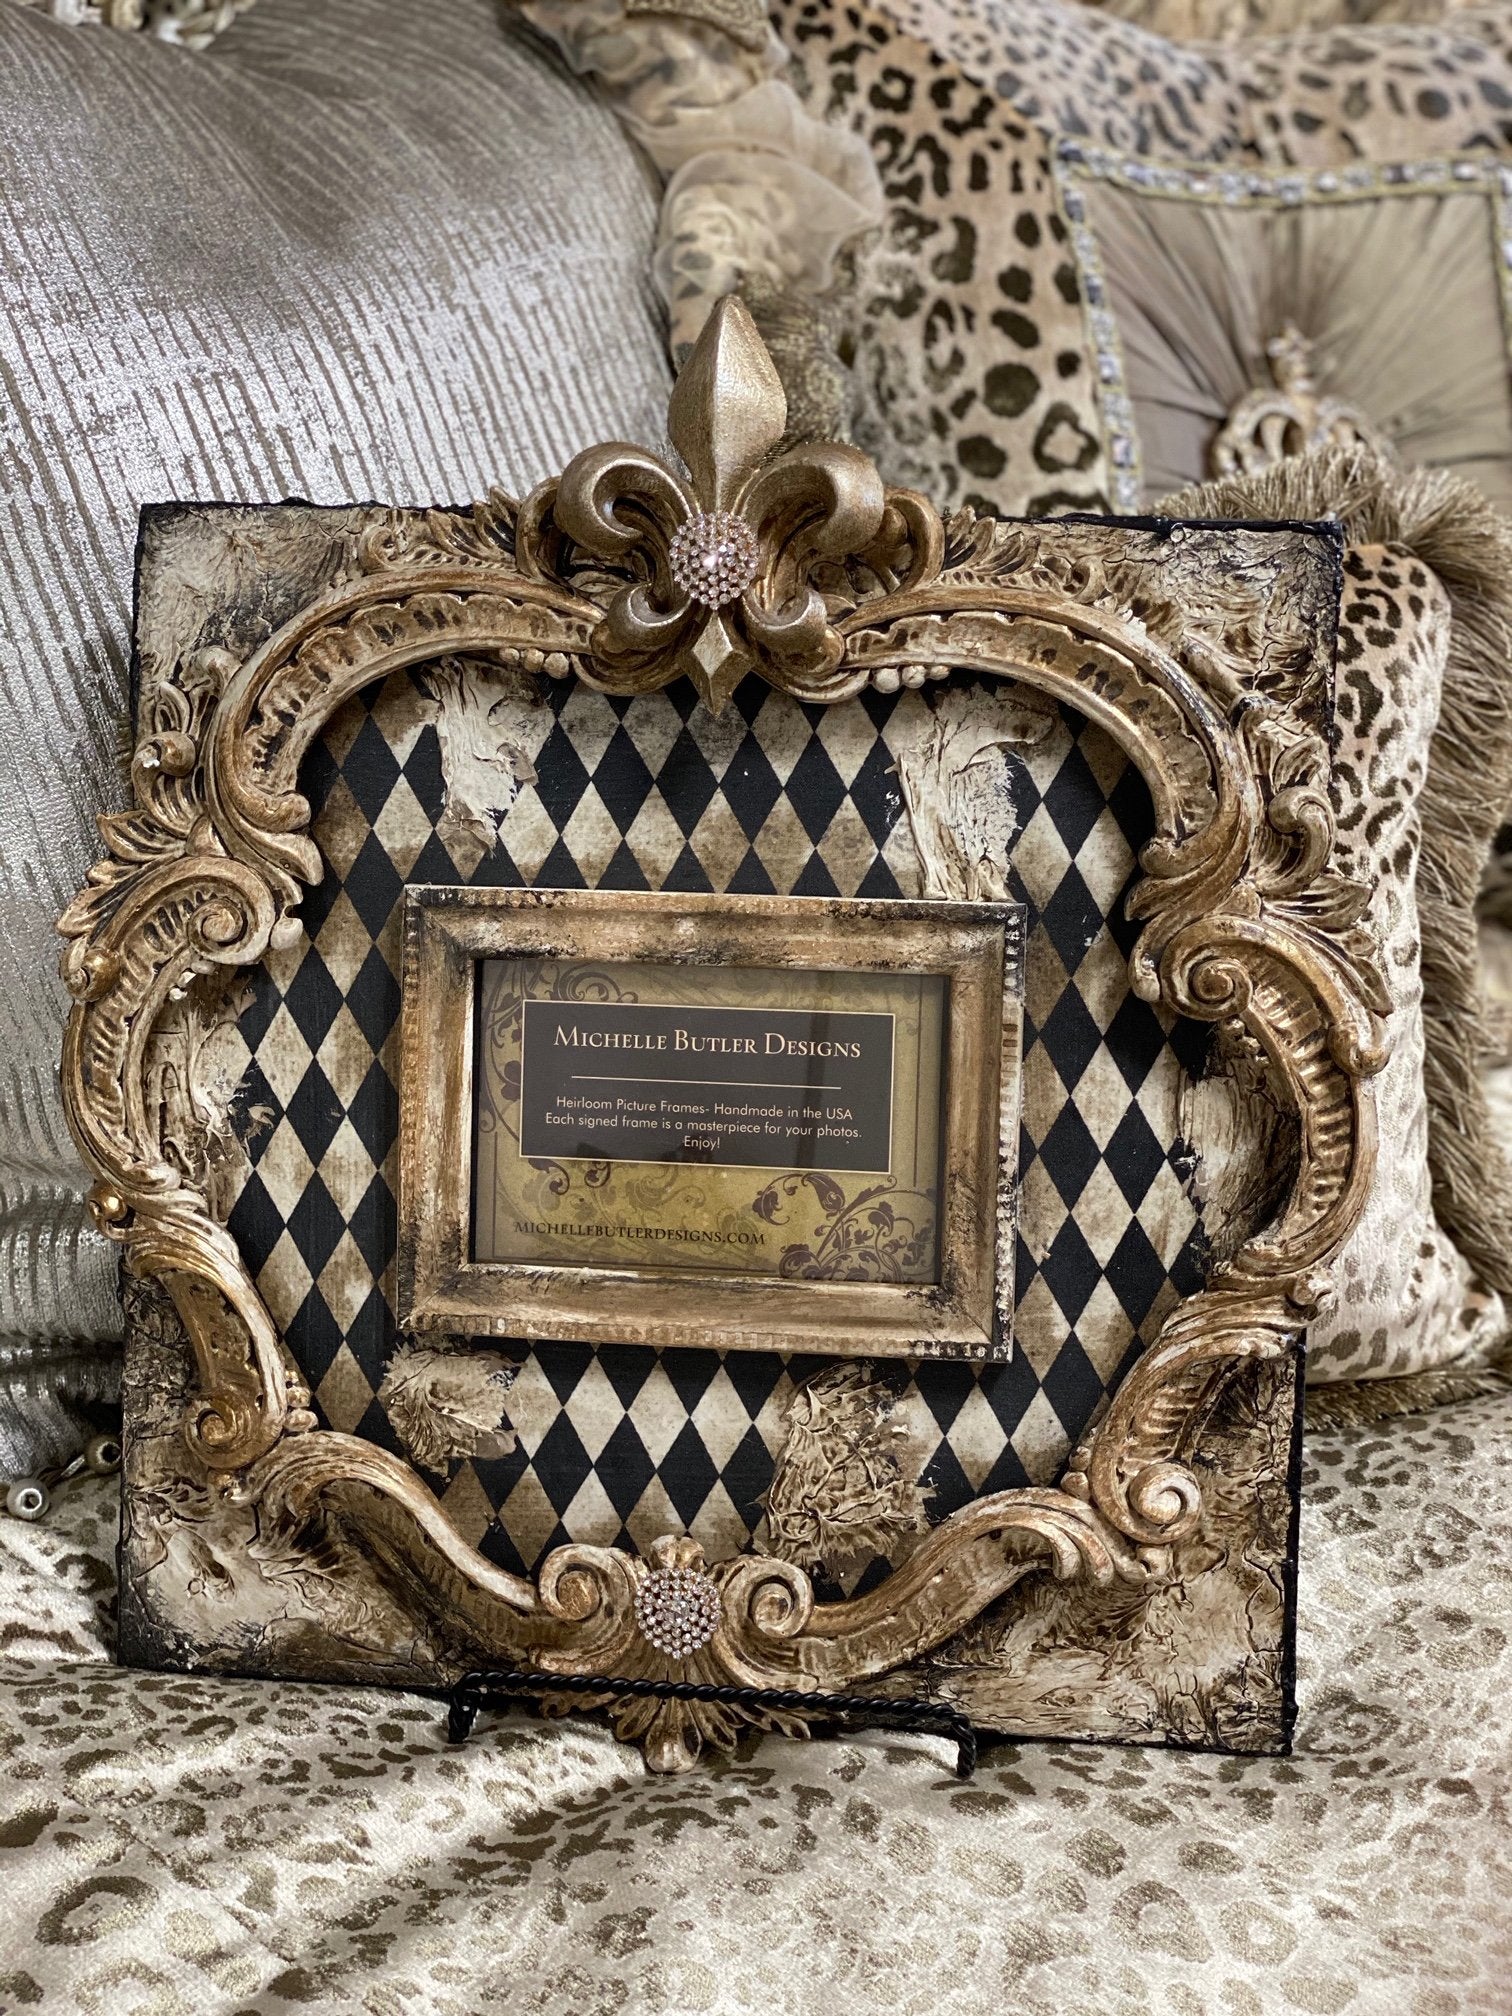 https://reilly-chanceliving.com/cdn/shop/products/Michelle_Butler_table_top_frames_with_harlequin_pattern-old_world_picture_frames-decorative_picture_frames-heirloom_picture_frames-reilly_chance.jpg?v=1599945397